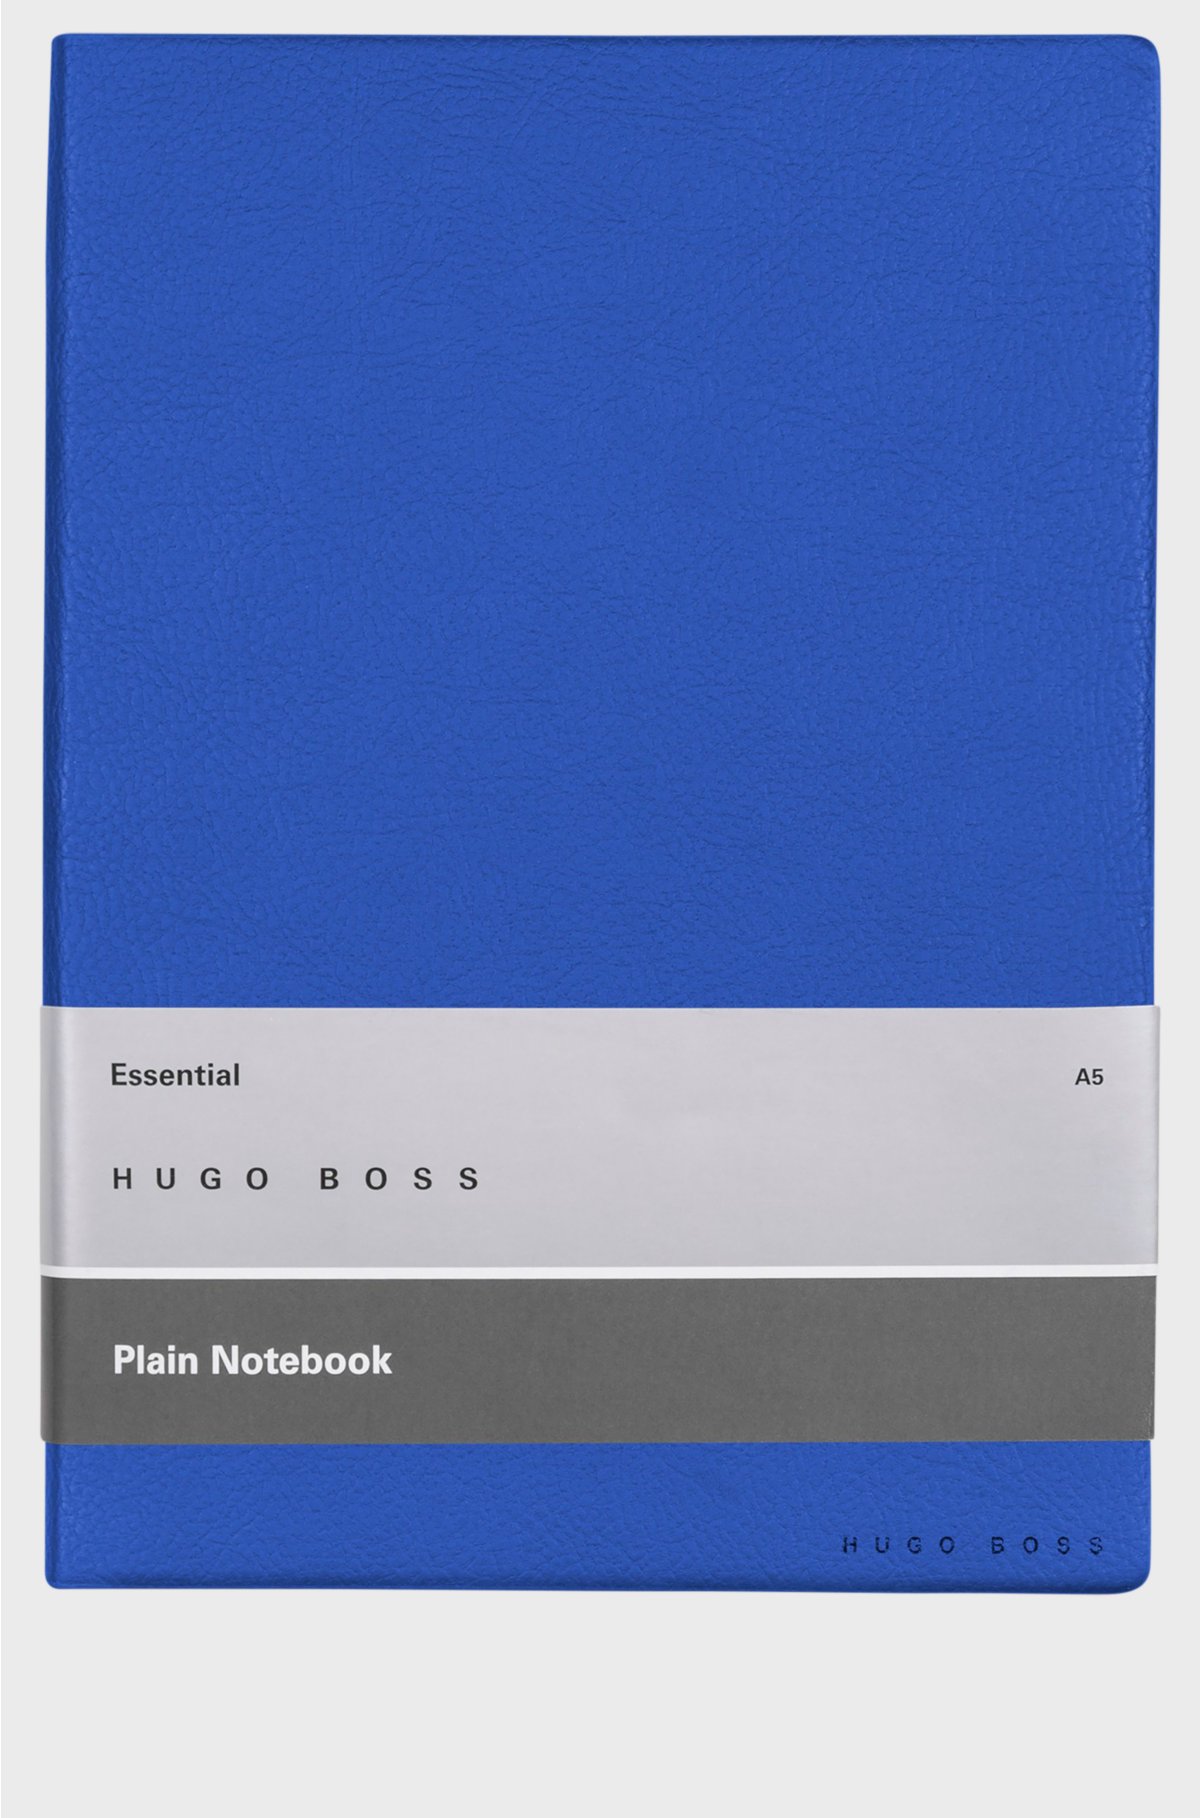 A5 notebook in blue faux leather, Blue